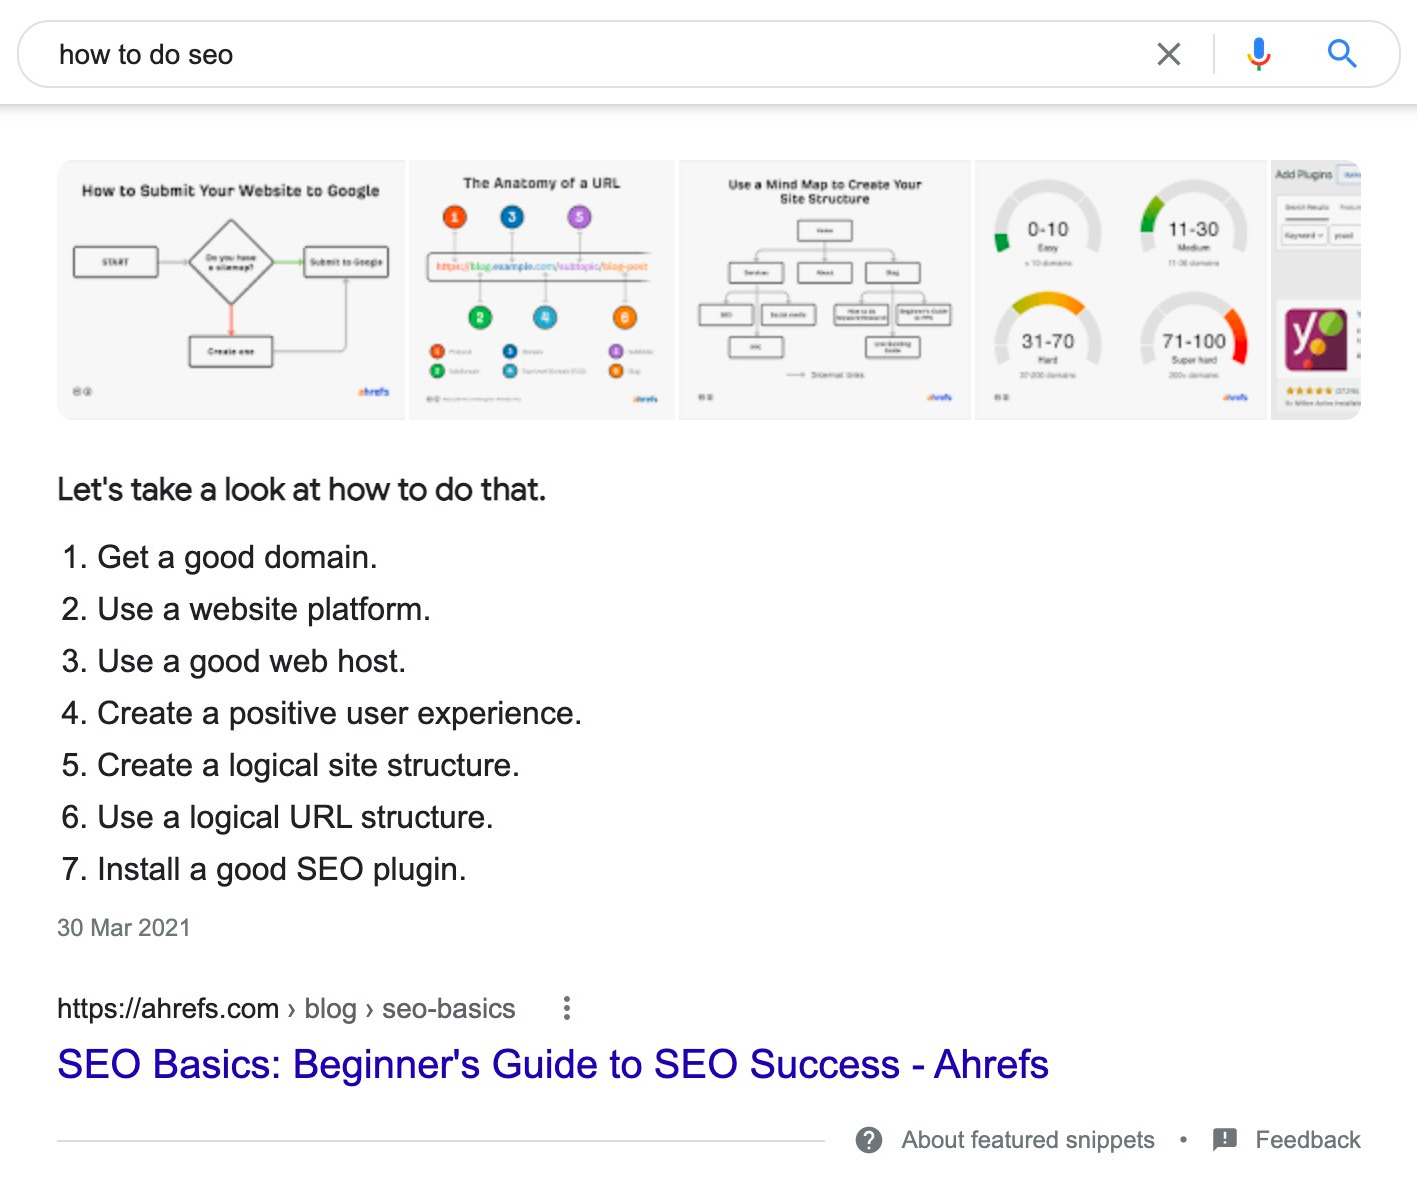 Ahrefs' featured snippet on Google SERP of "how to do seo"